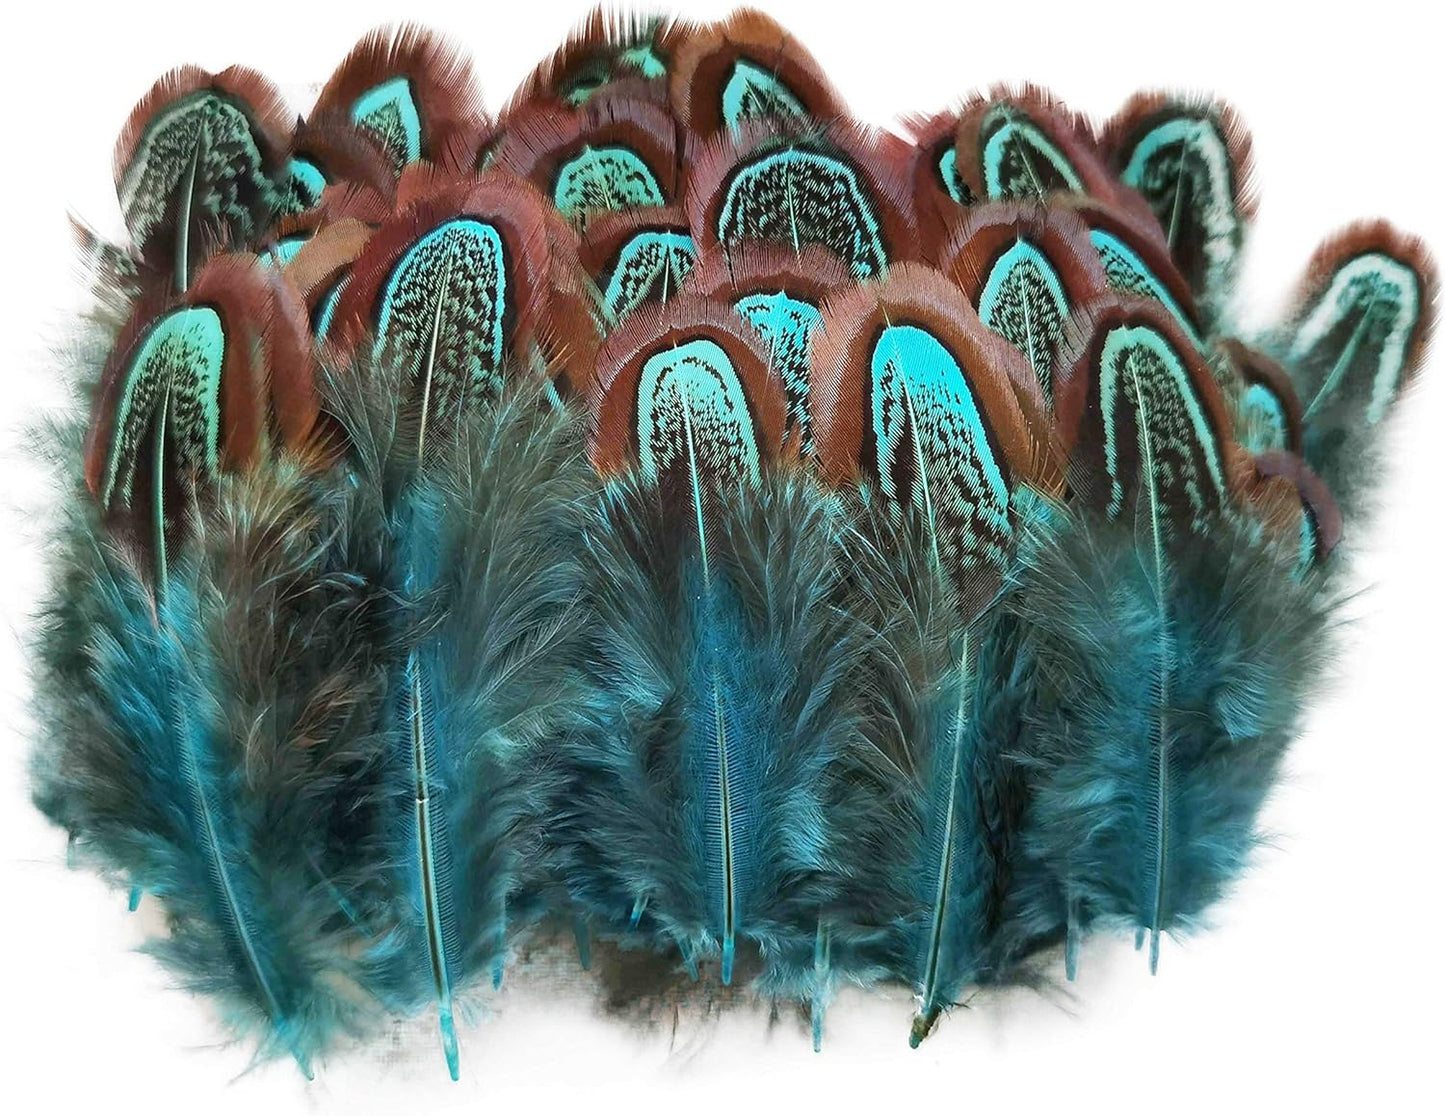 The Small Feathers